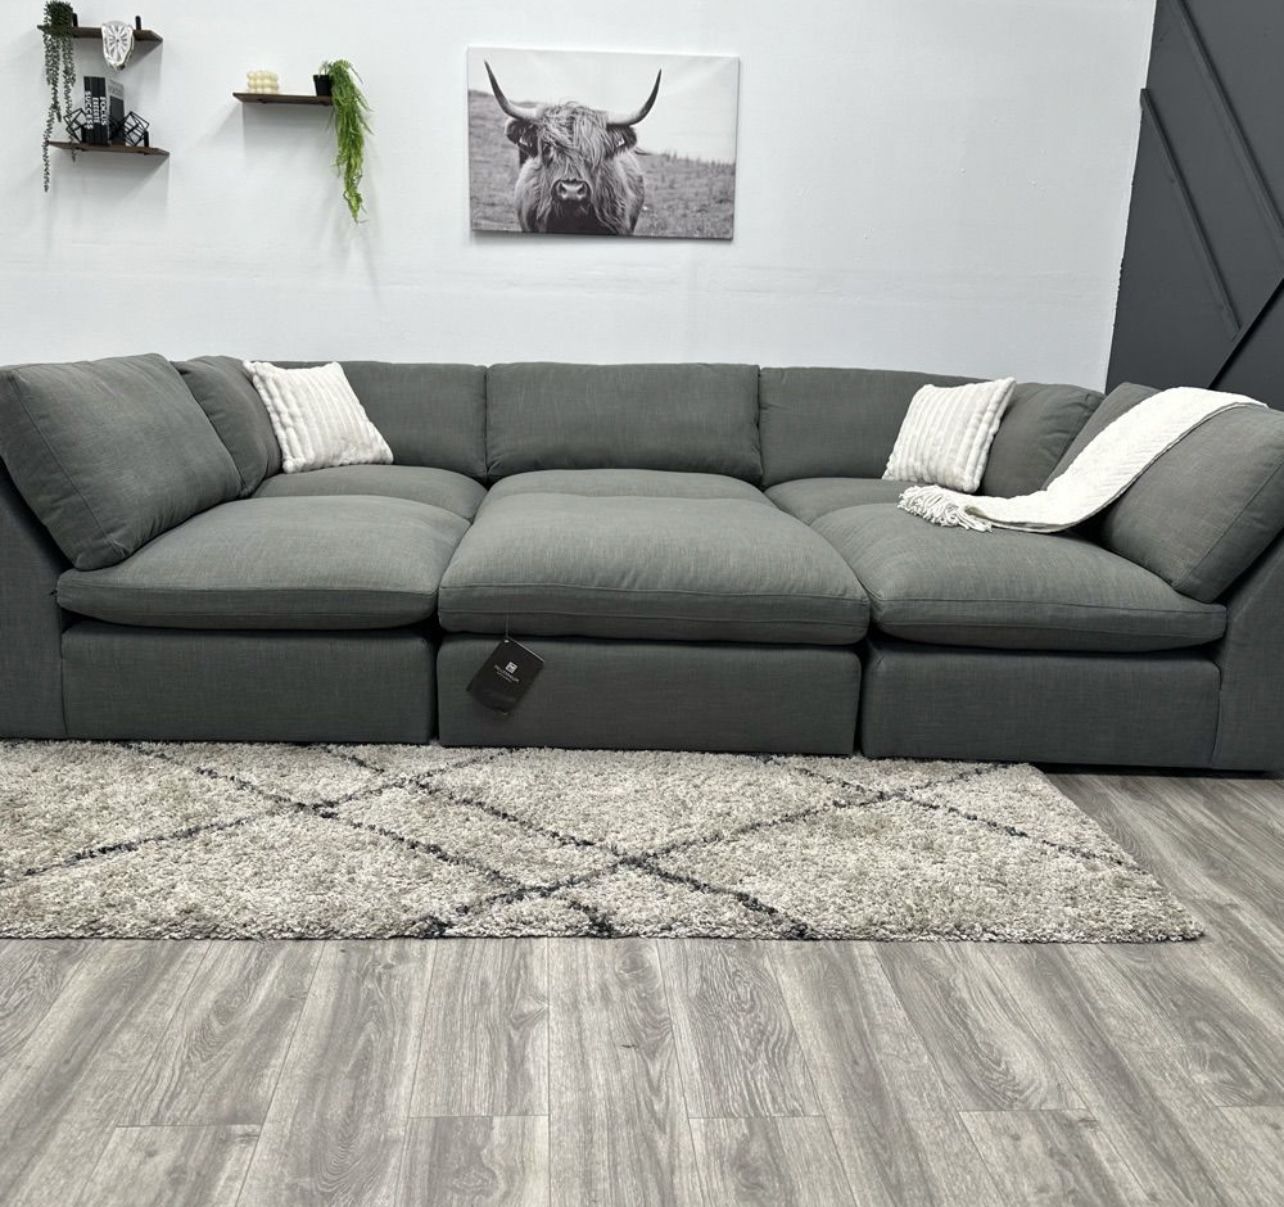 Brand New Ashley Cloud Couch Sectional 